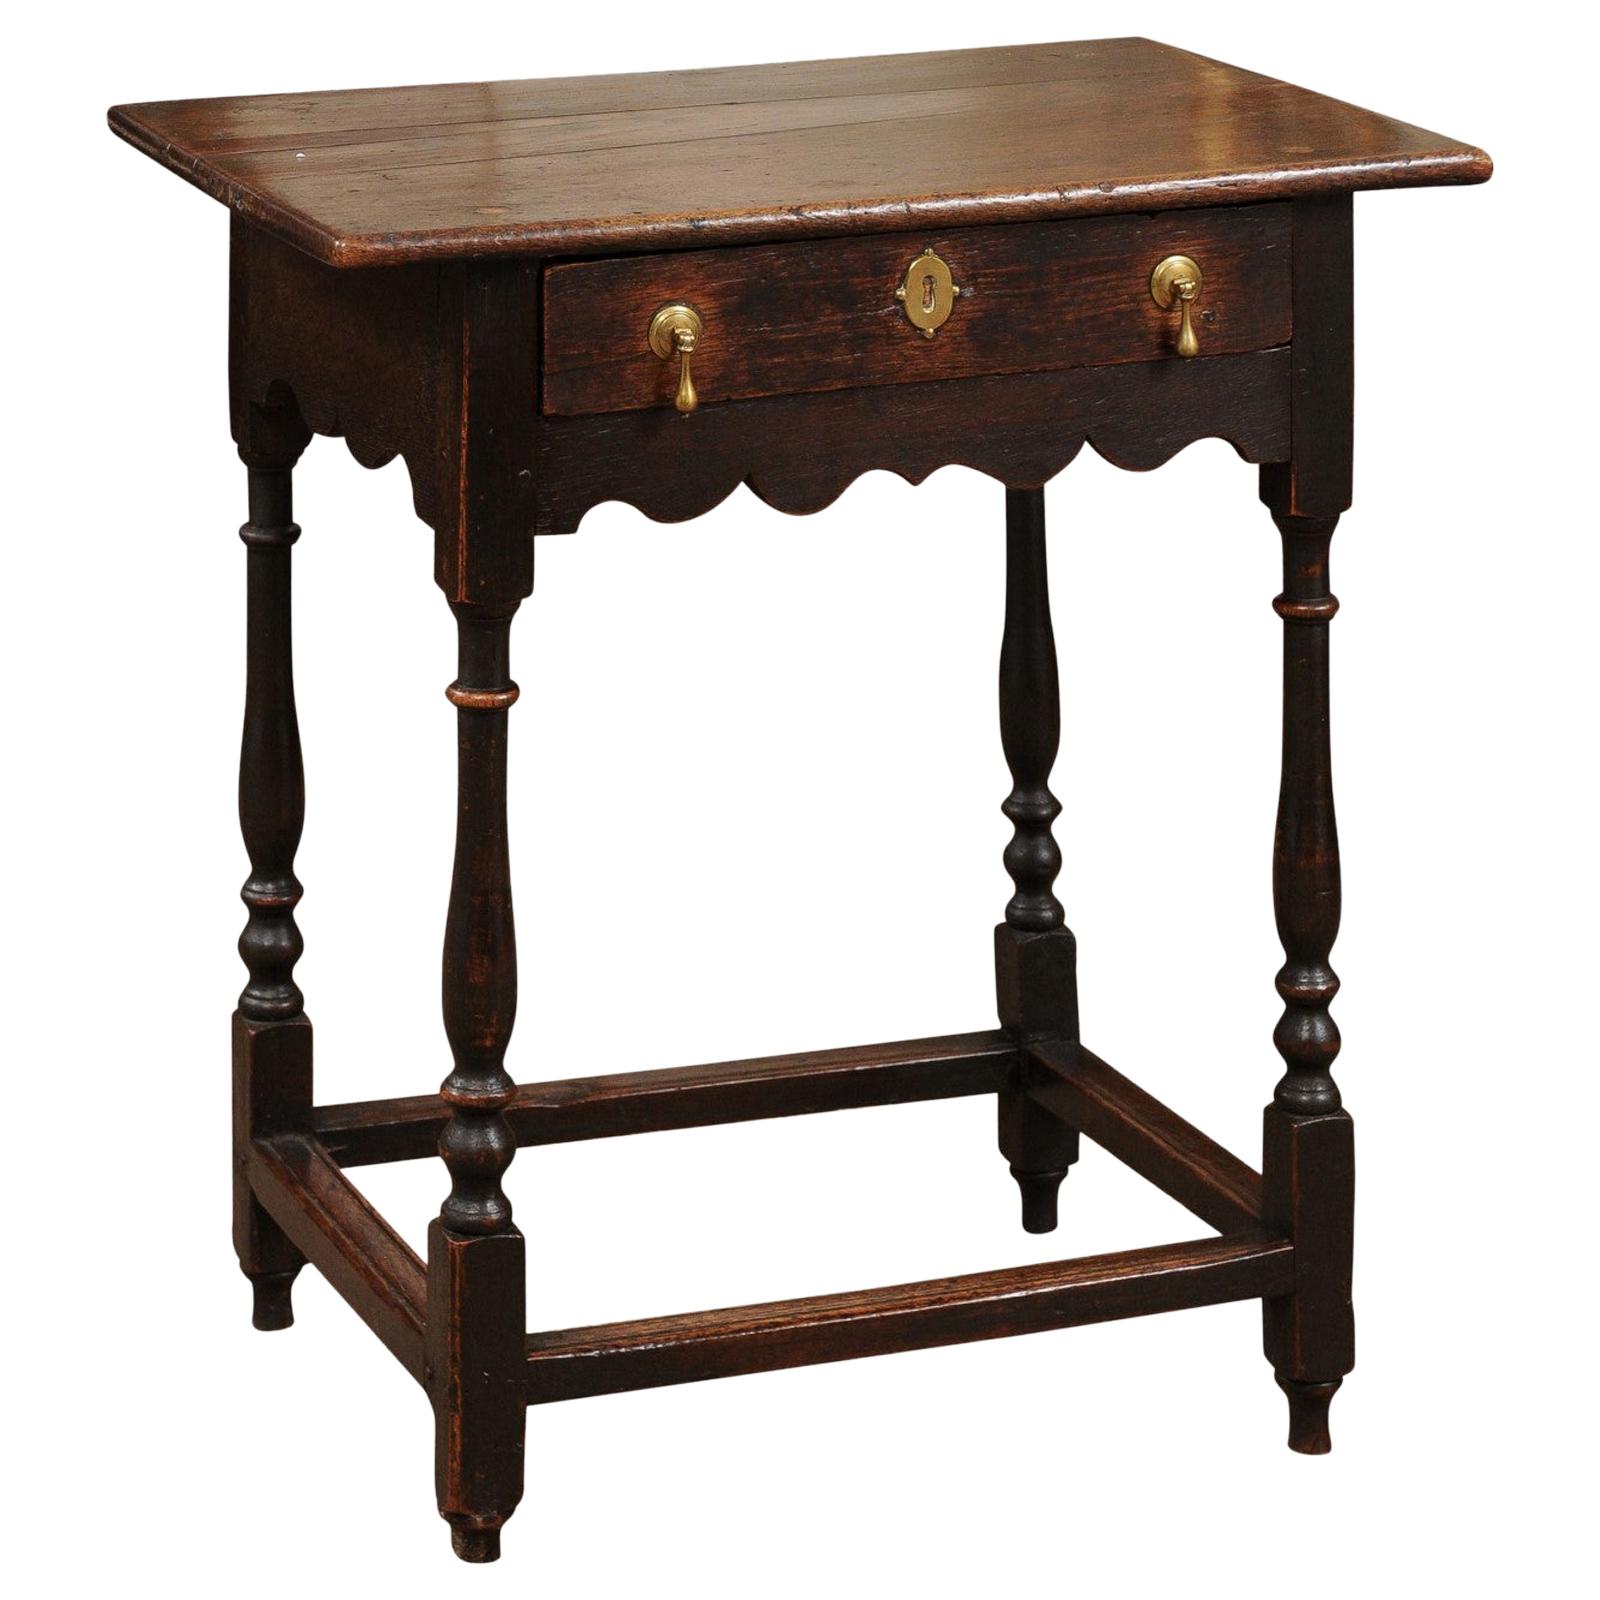 English William & Mary Style Oak Side Table, Late 18th Century